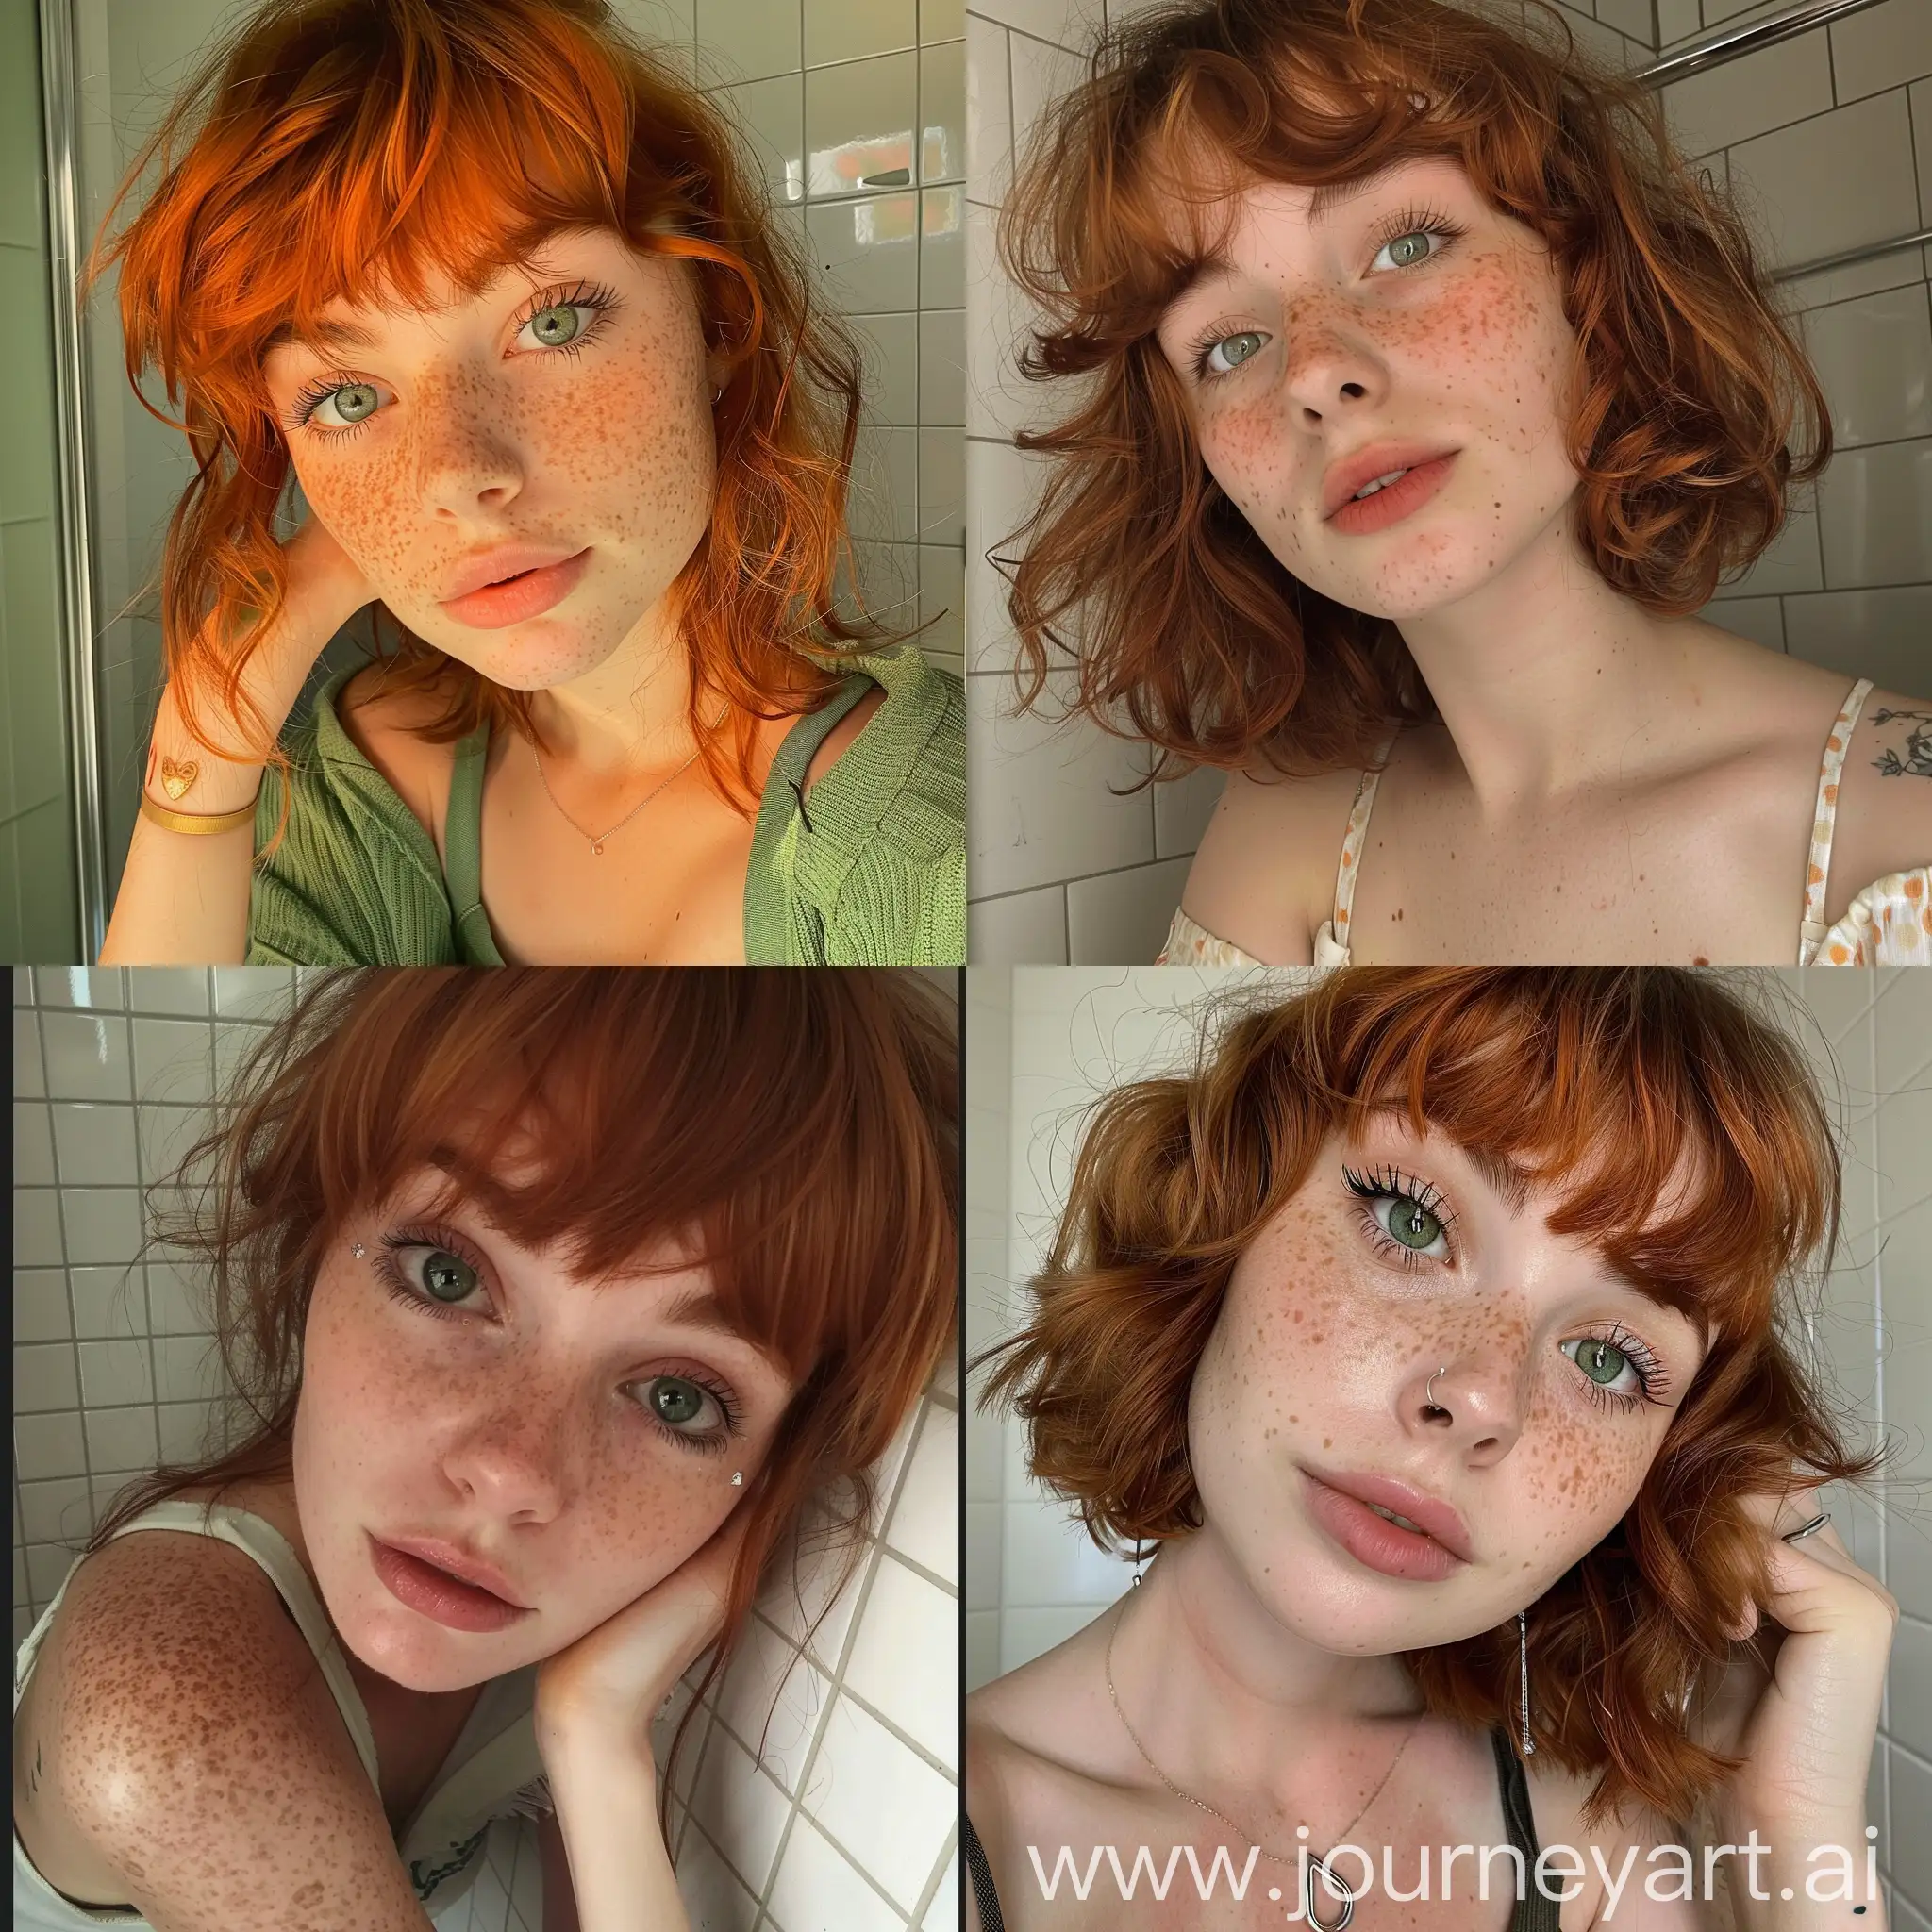 Adorable-15YearOld-Girls-Instagram-Selfie-with-Freckles-and-Red-Hair